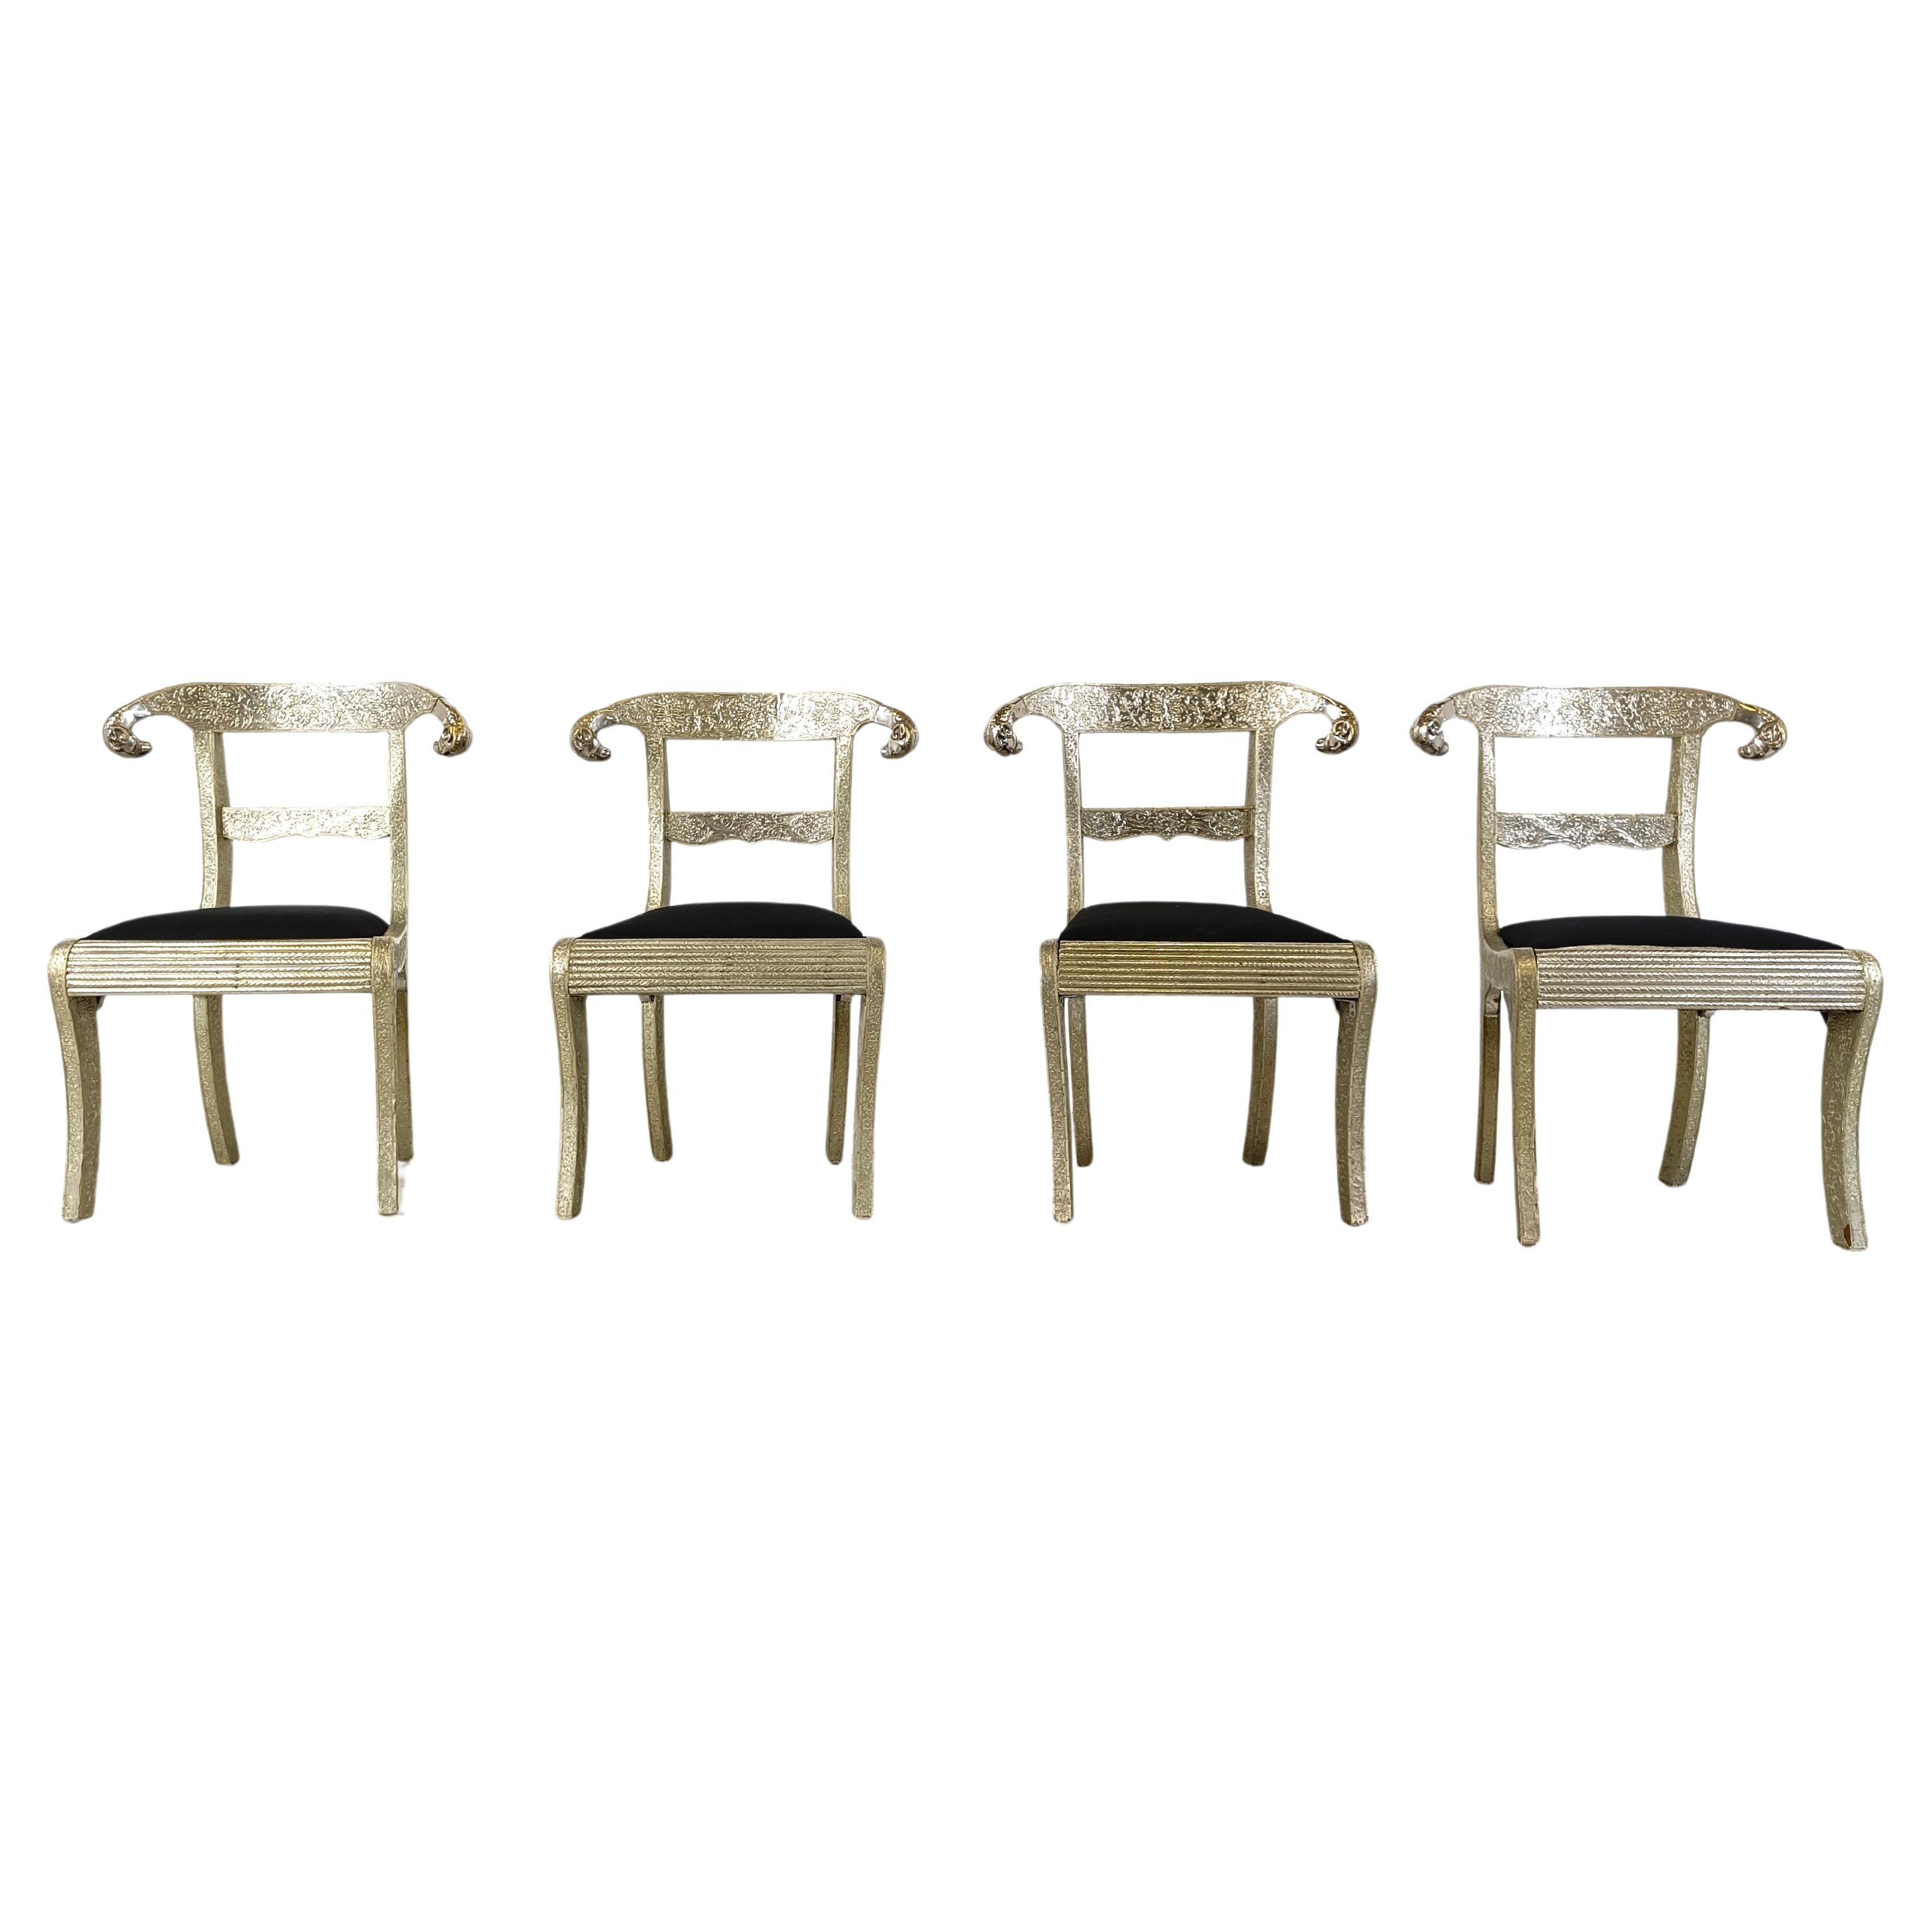 Anglo-Indian silvered dowry chairs, 1950s For Sale